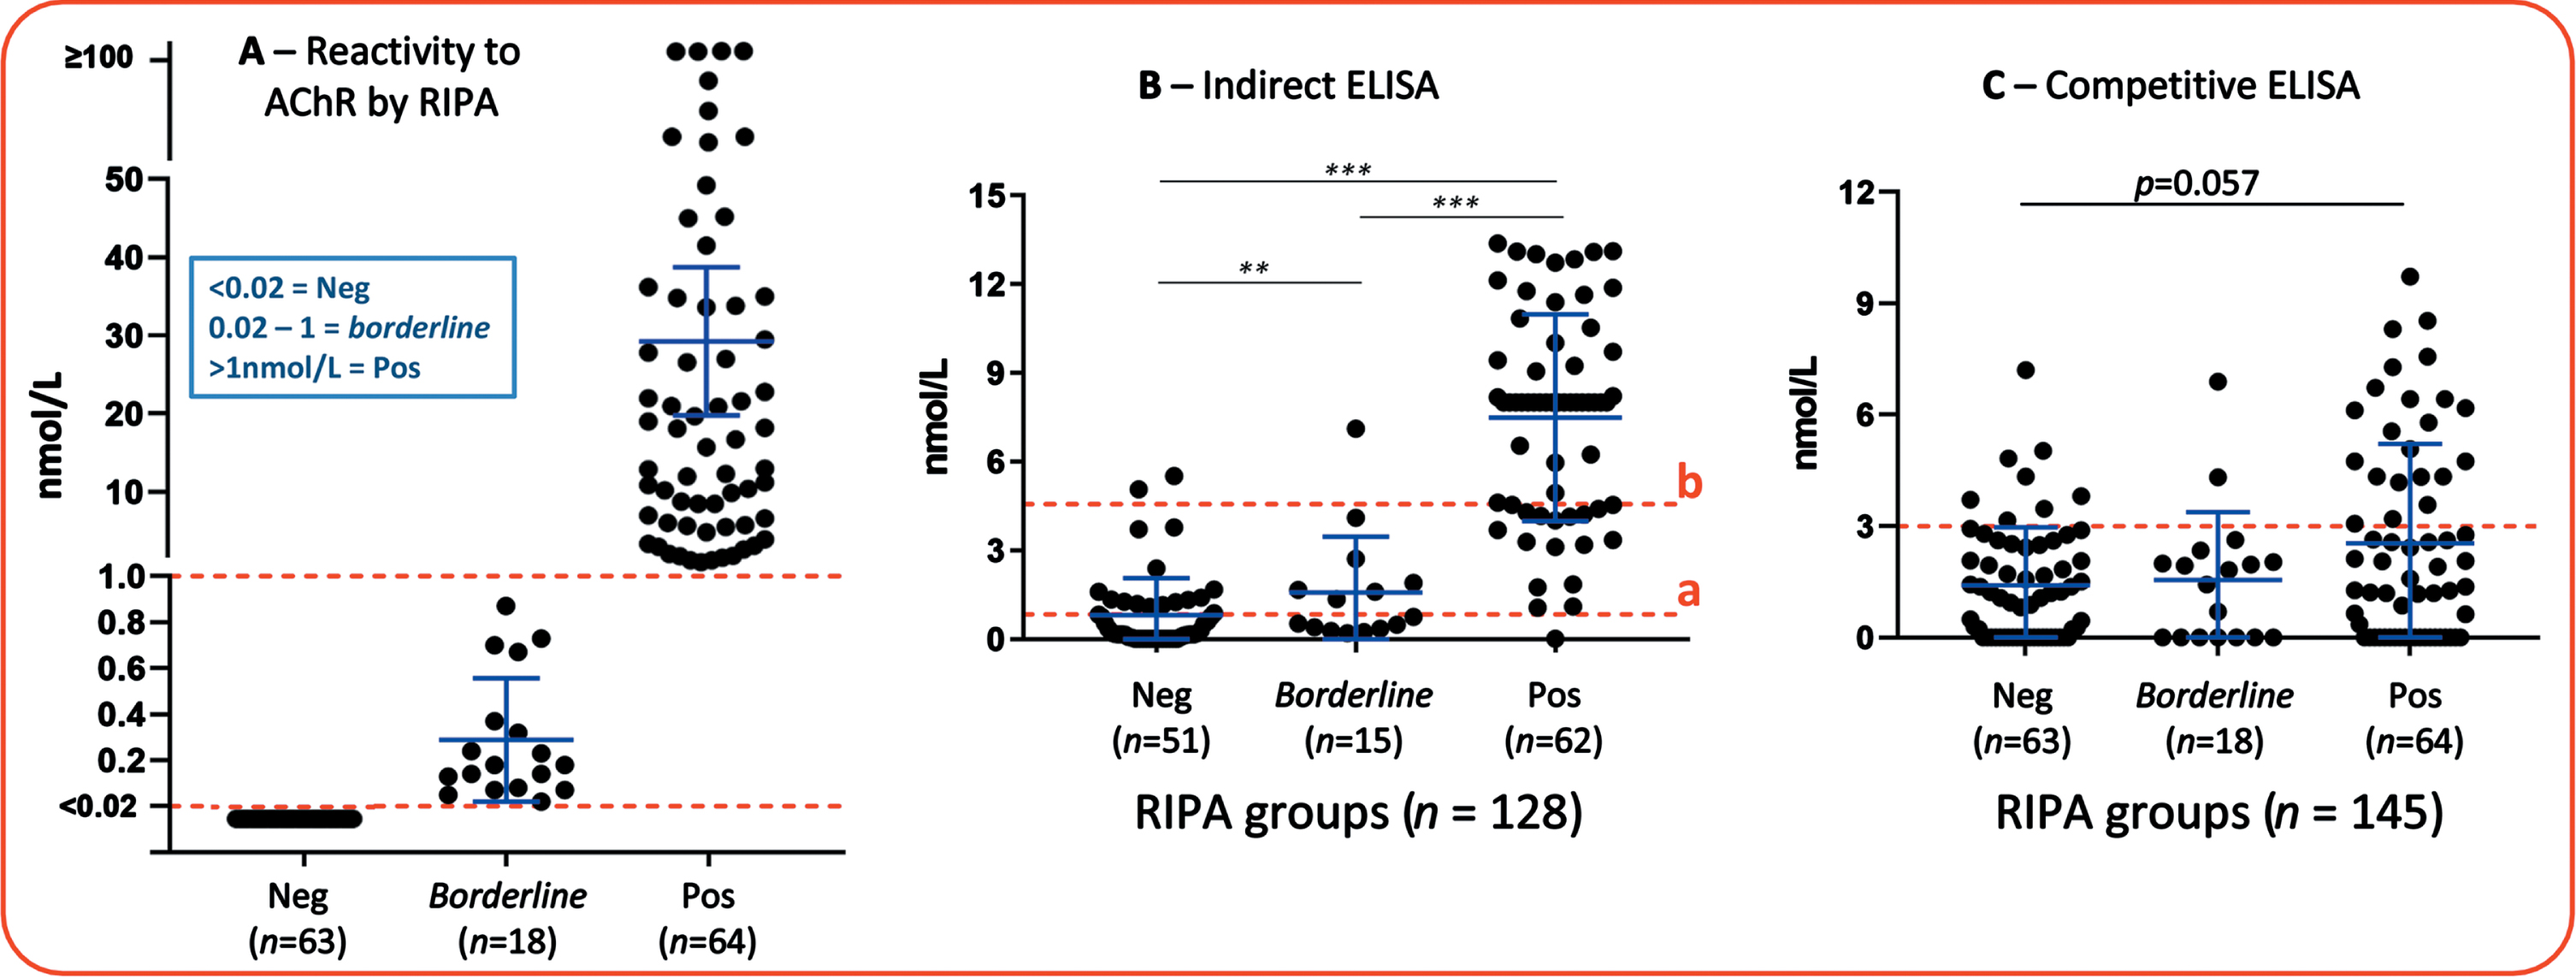 Anti-nAChR reactivity by RIPA and ELISA. (A) Anti-nAChR reactivity by RIPA, distribution of samples in the groups according to nmol/L (B) Anti-nAChR reactivity analyzed using an indirect ELISA. Line “a” indicates the Youden index J cutoff = 0.8409, that promotes sensitivity. Line “b” indicates a cutoff that promotes specificity = 4.568, calculated based on the average+3SD of the RIPA-negative group. (C) Analysis using a Competitive ELISA. The cutoff of 3nmol/L was based on the average + 1SD of the RIPA-negative group. **p≤0.01; ***p≤0.001. Error bars = SD.